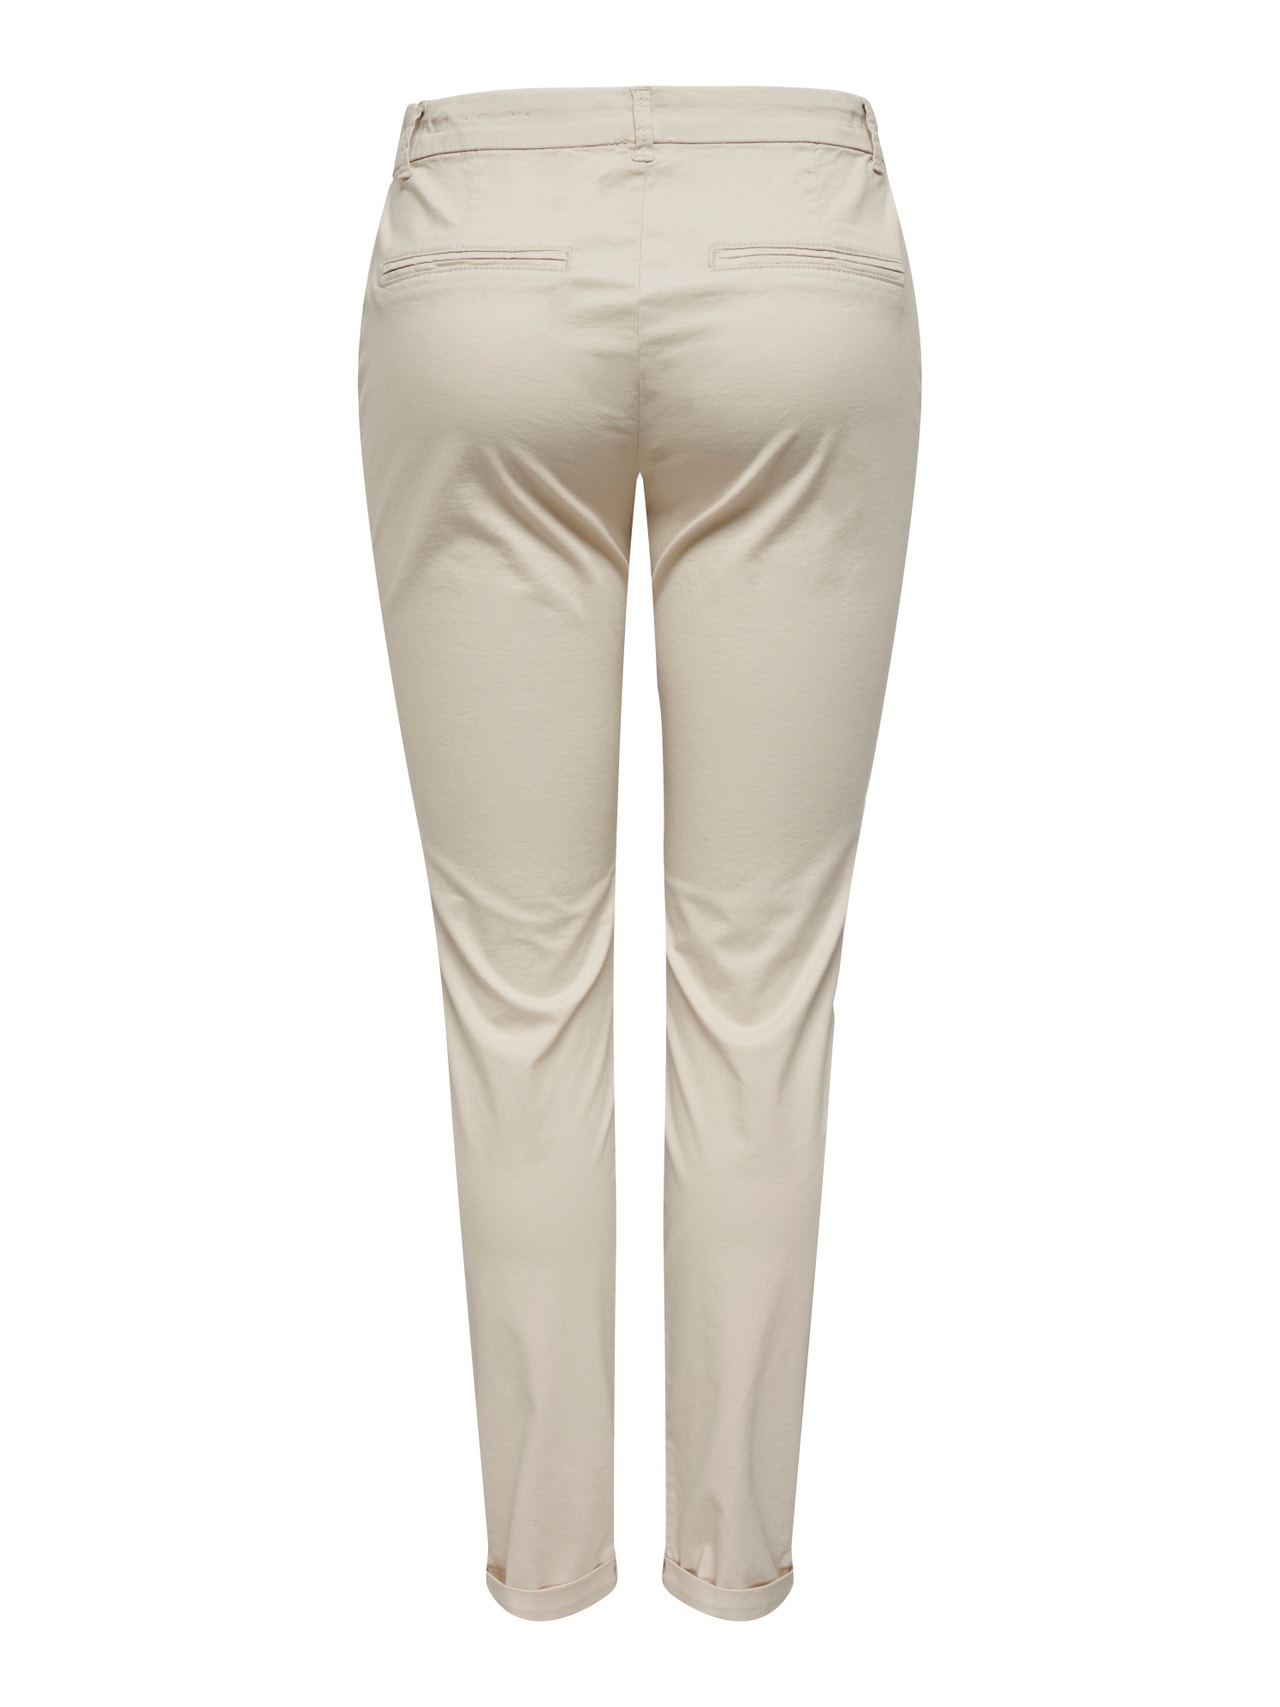 ONLY Classique Chinos -Pumice Stone - 15200641